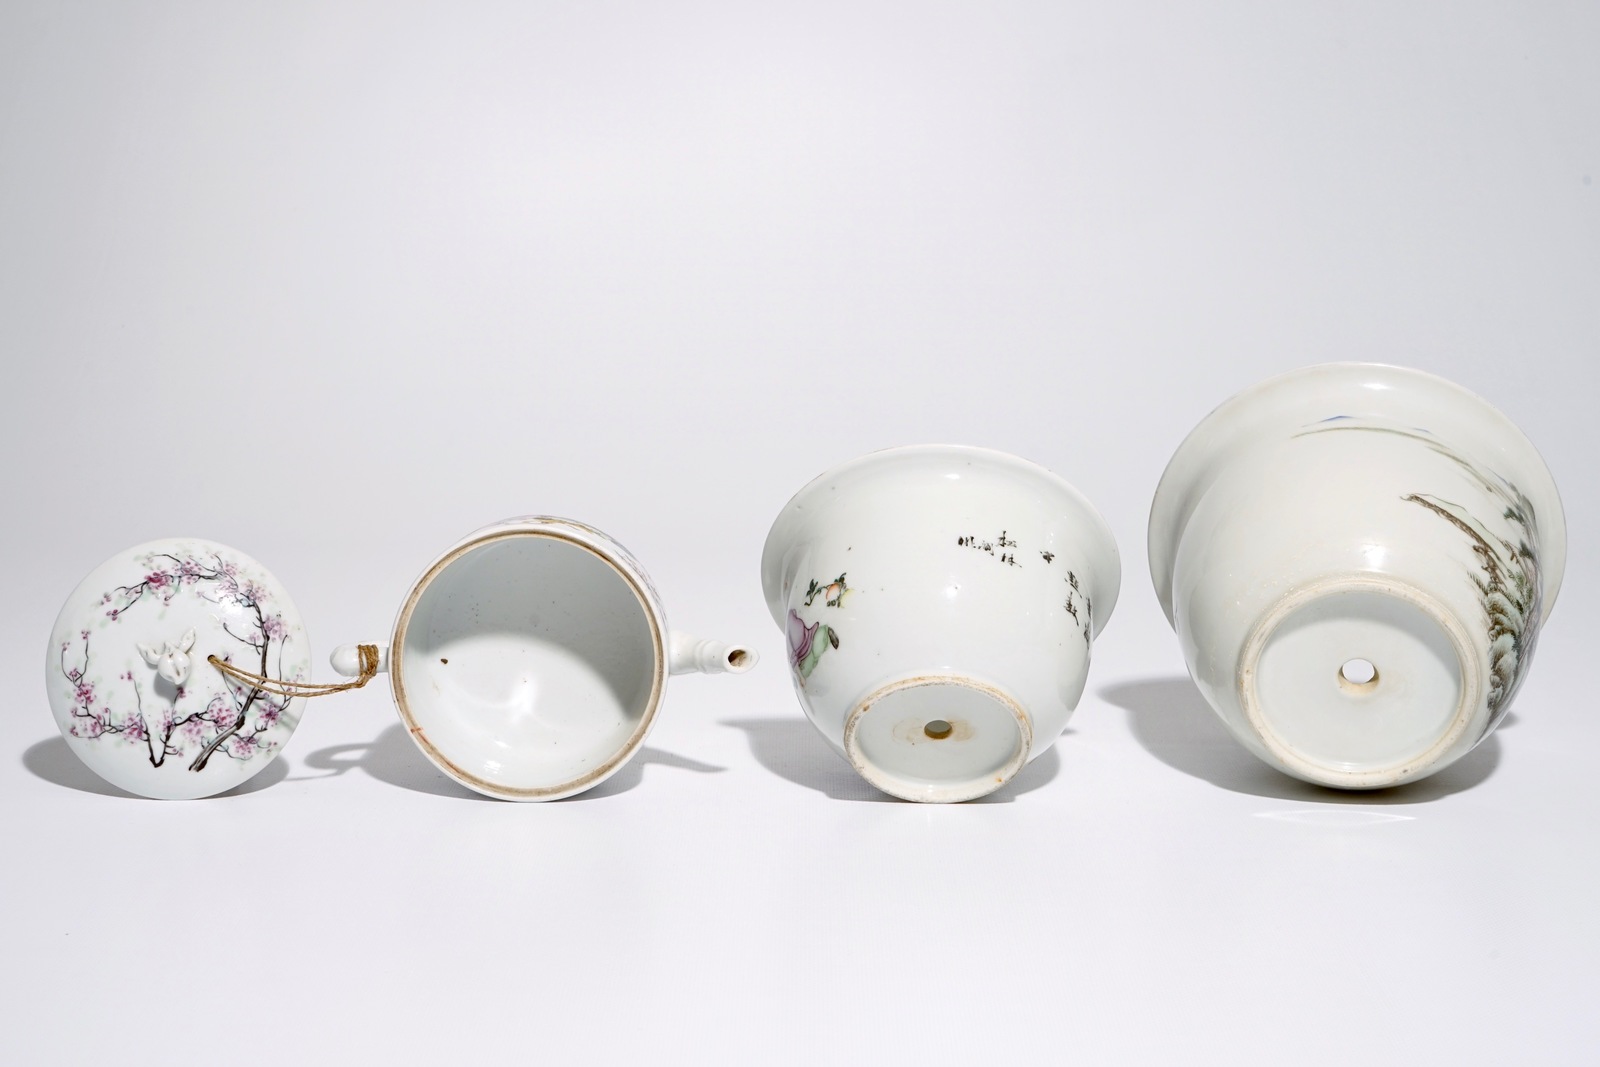 A varied lot of Chinese qianjiang cai porcelain, 19/20th C. Dia.: 17 cm - H.: 12 cm (largest bowl) - Image 9 of 9